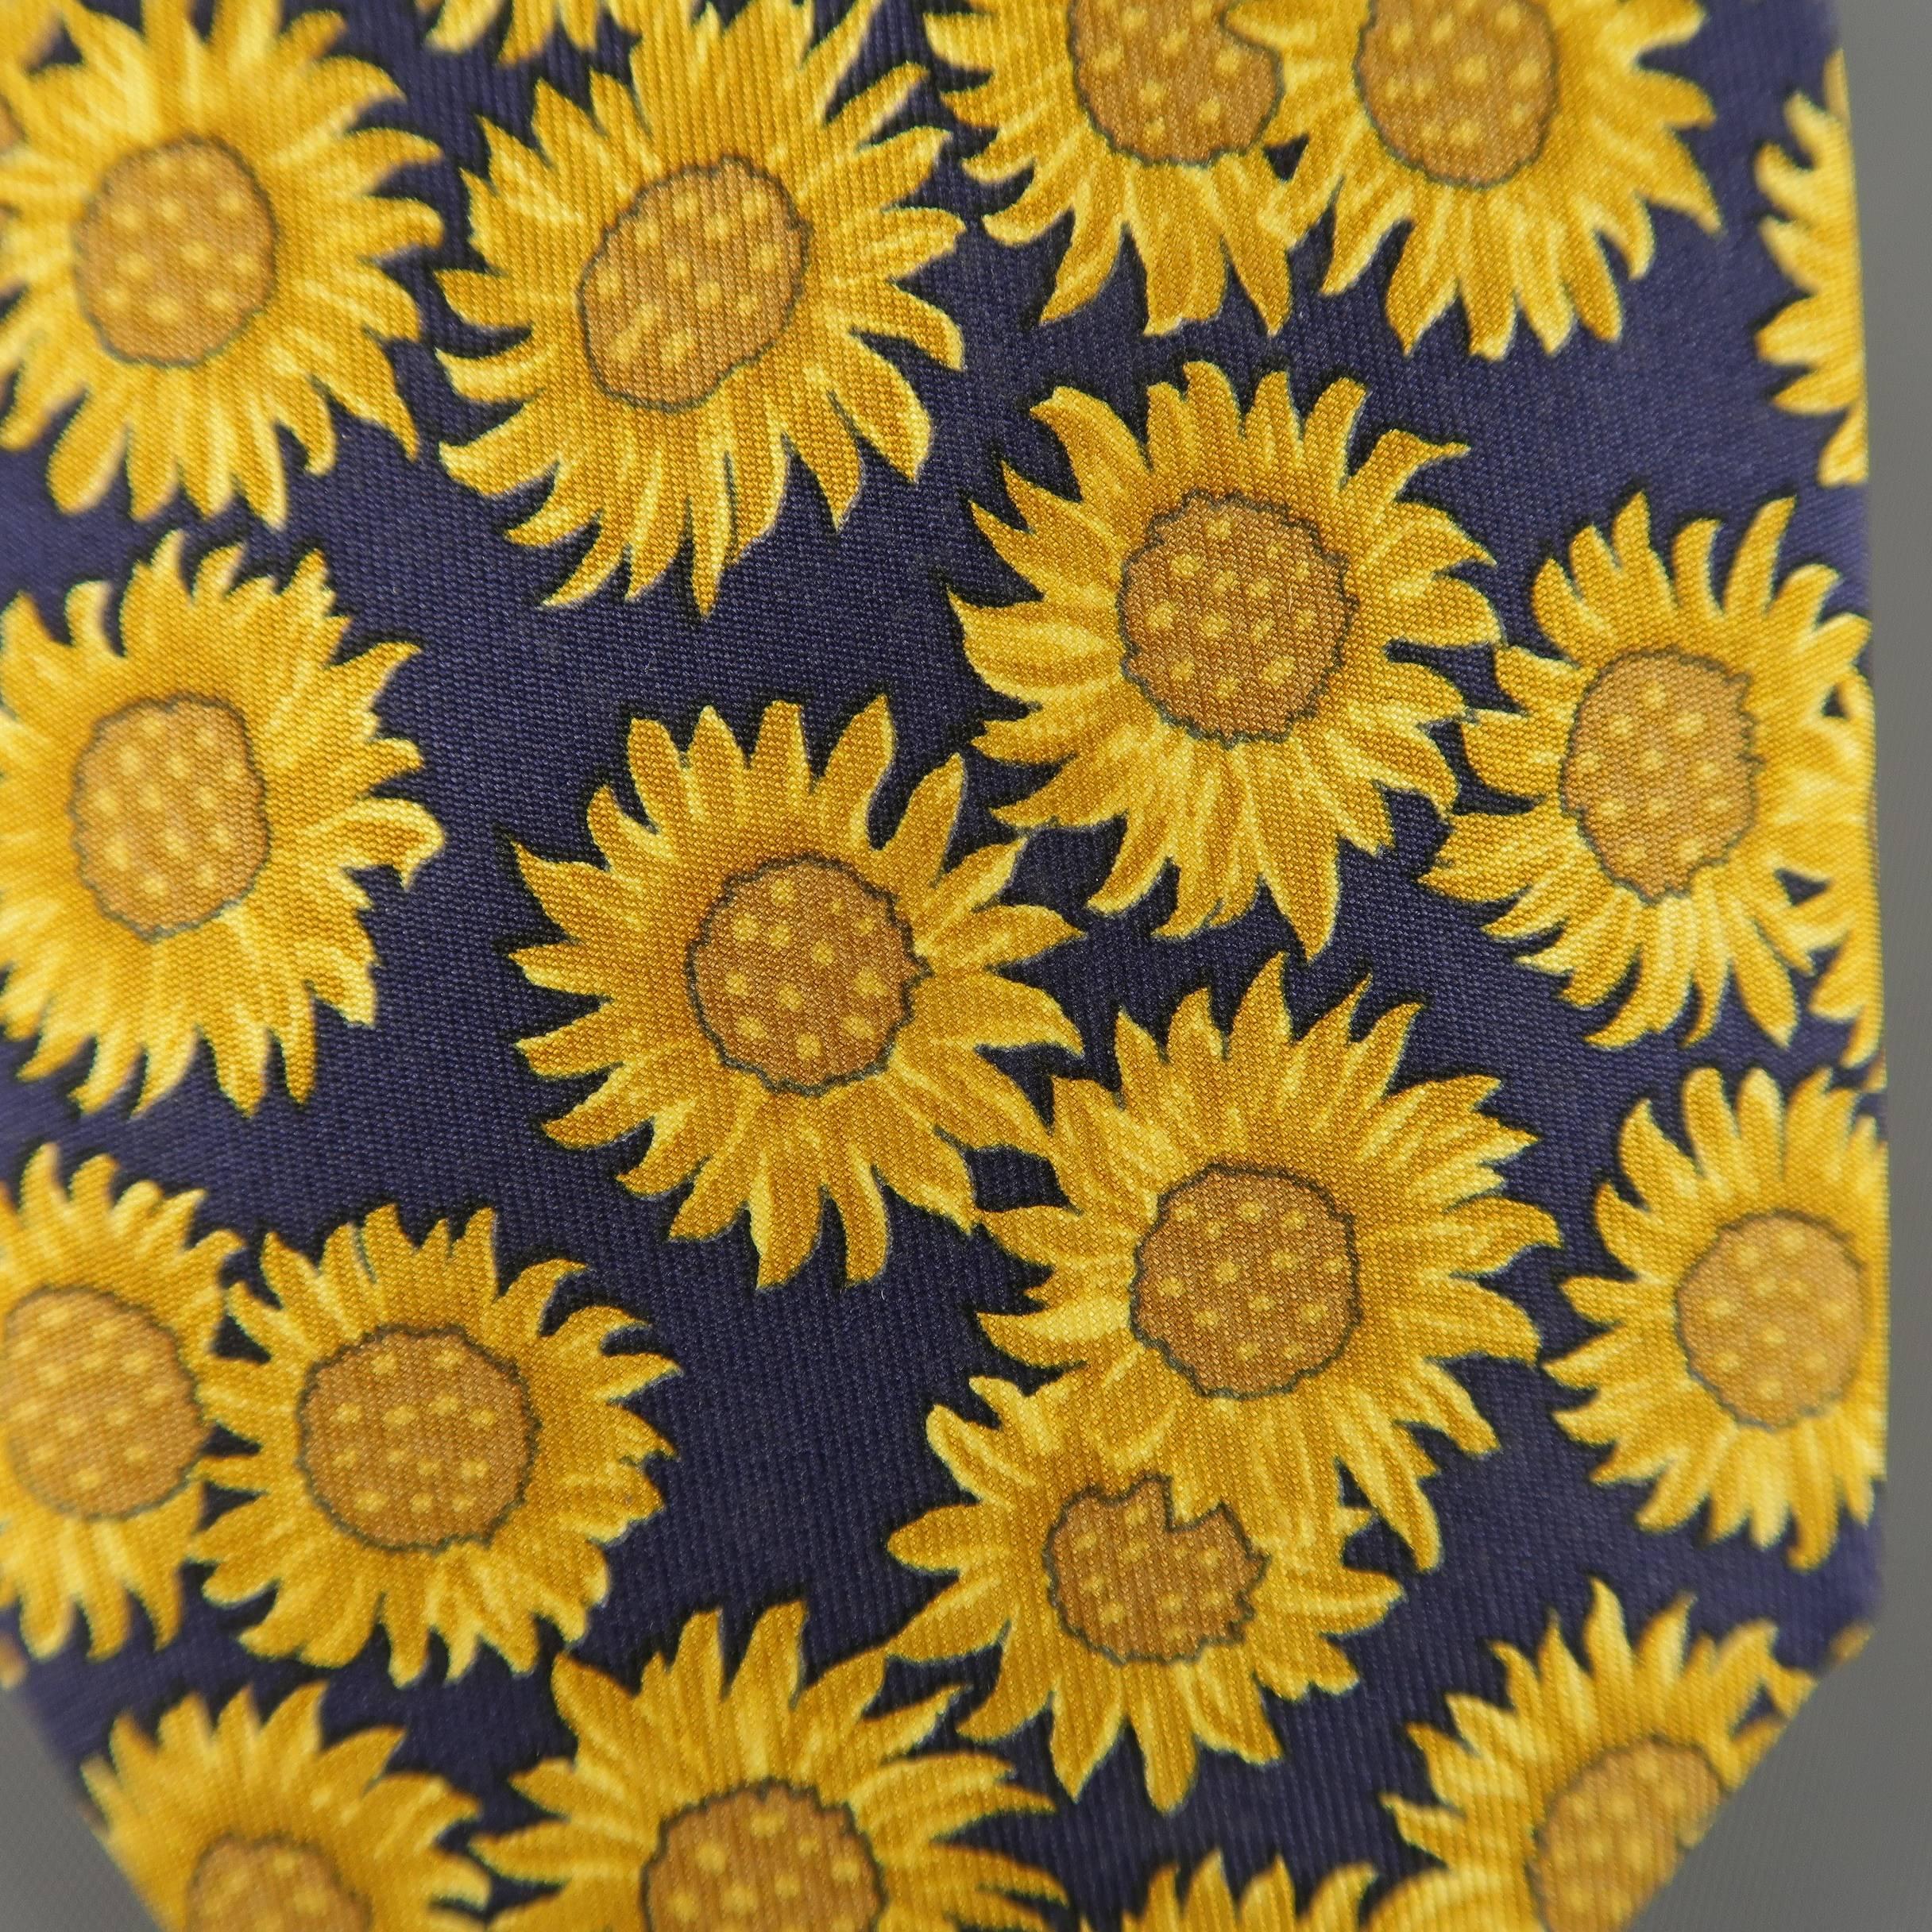 Vintage HERMES necktie comes in navy blue silk twill with all over sun flower print. Discolorations throughout. As-is. Made in France.
 
Good Pre-Owned Condition.
 
Width: 3.25 in.
